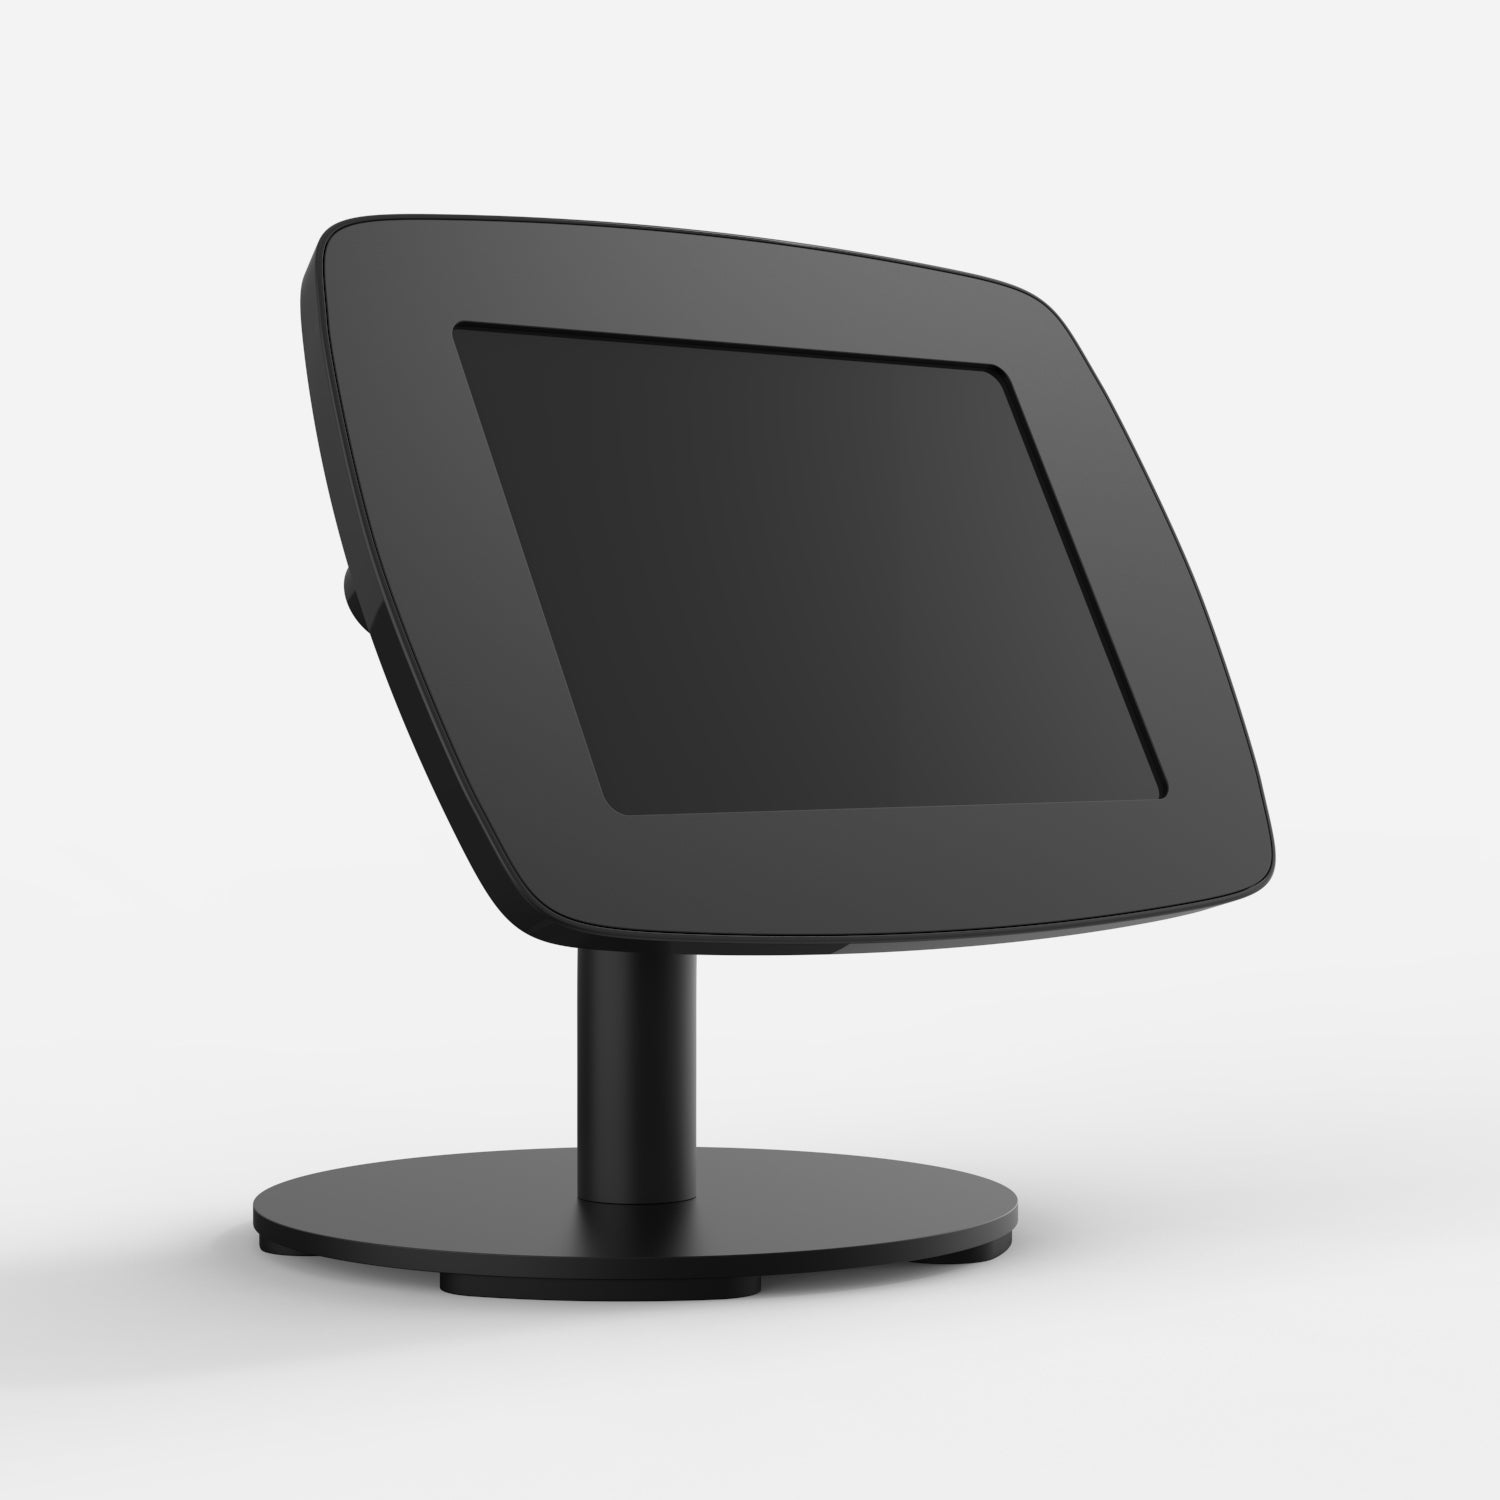 Bouncepad Counter 60 - A secure tablet & iPad tablet stand in black.